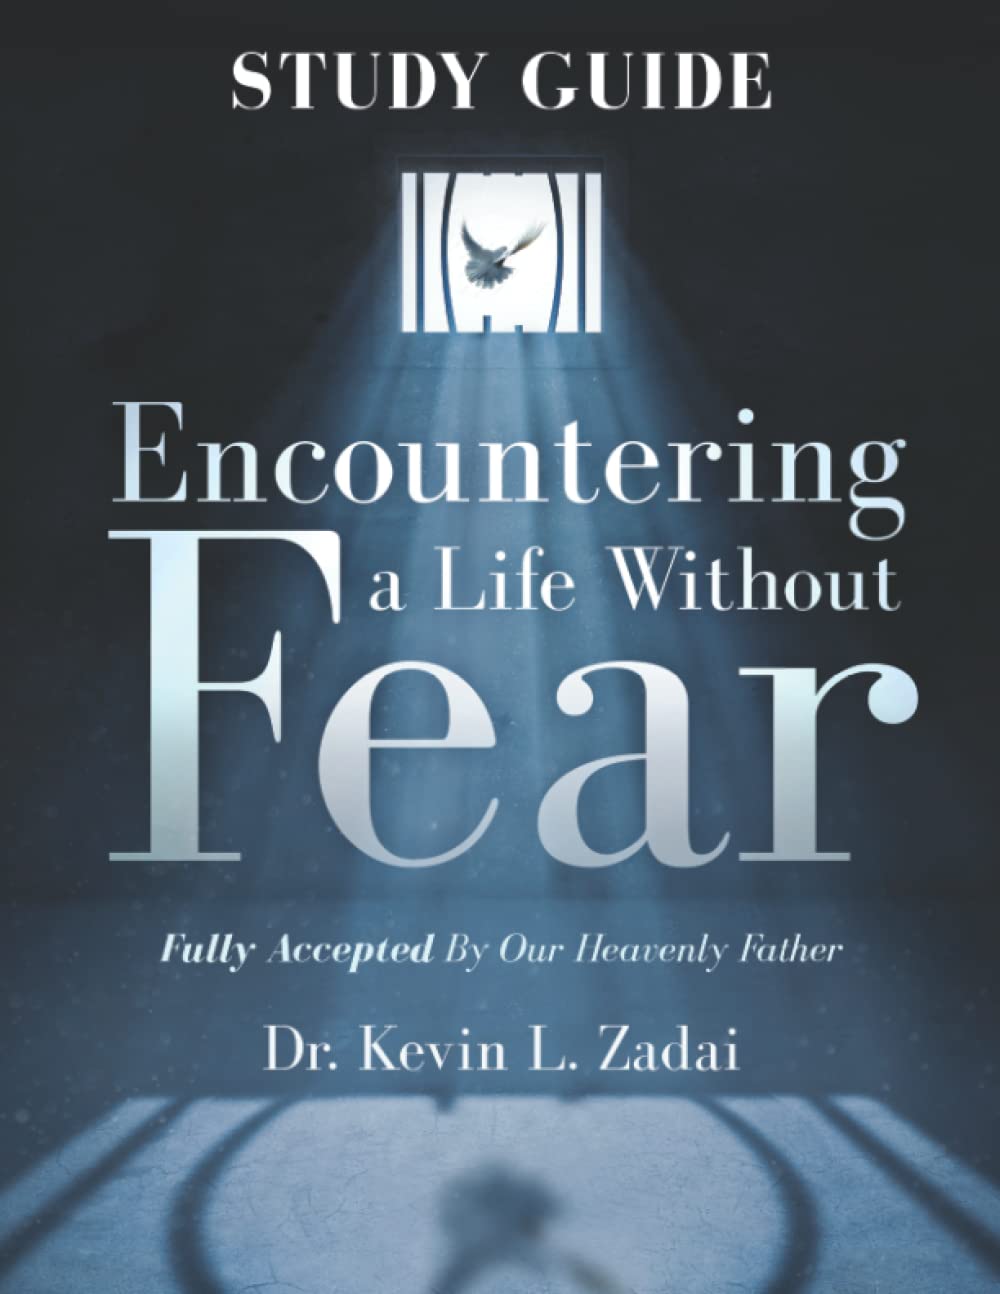 Encountering a Lite with Fear : : Fully Accepted By Our Heavenly Father- Study Guide